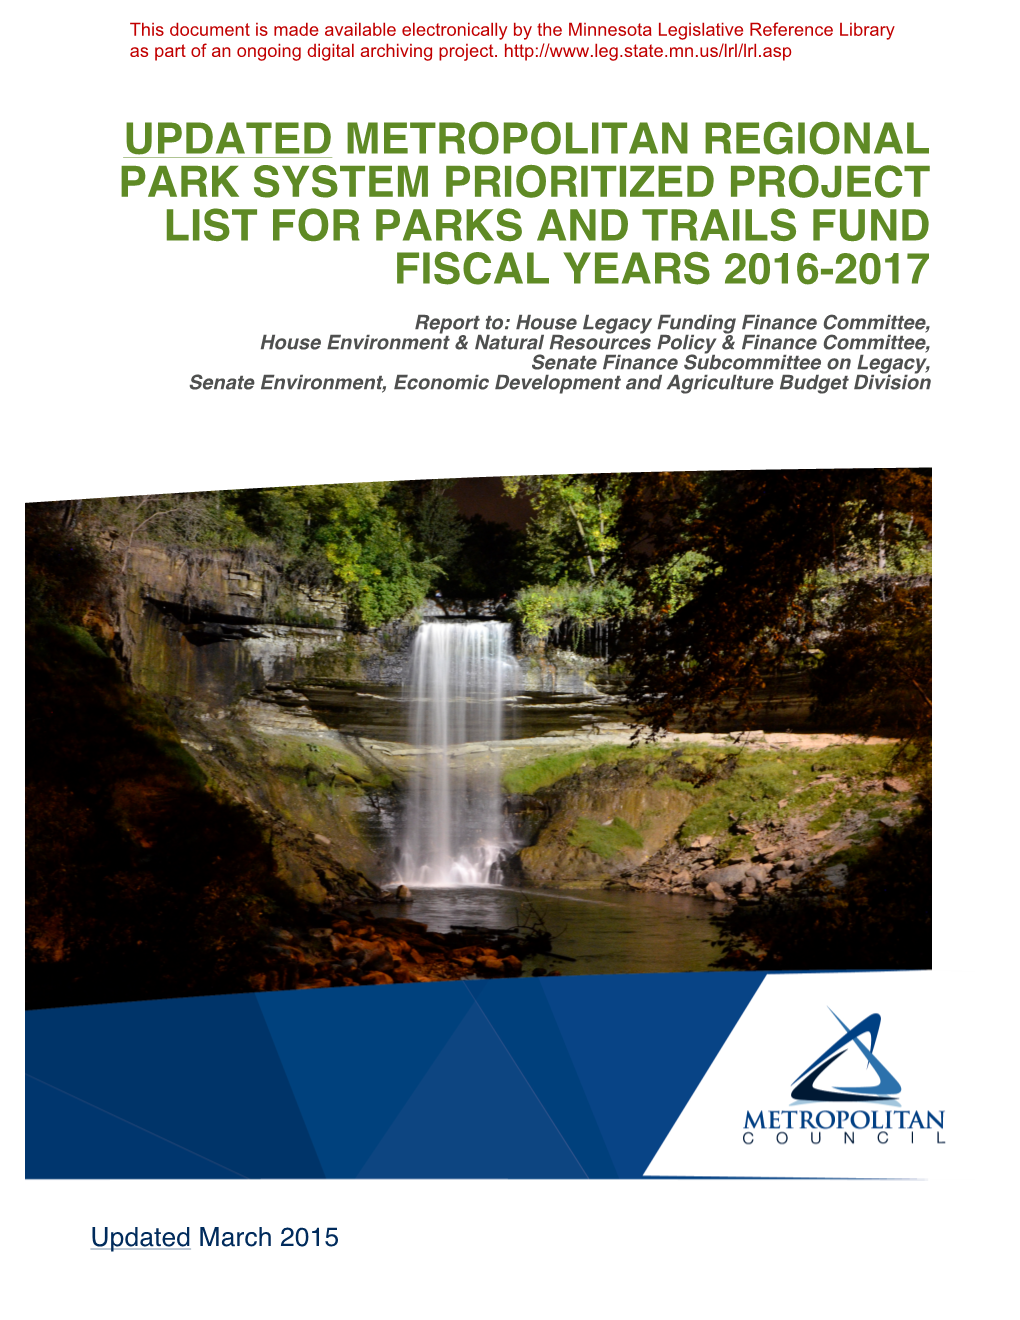 Updated Metropolitan Regional Park System Prioritized Project List for Parks and Trails Fund Fiscal Years 2016-2017